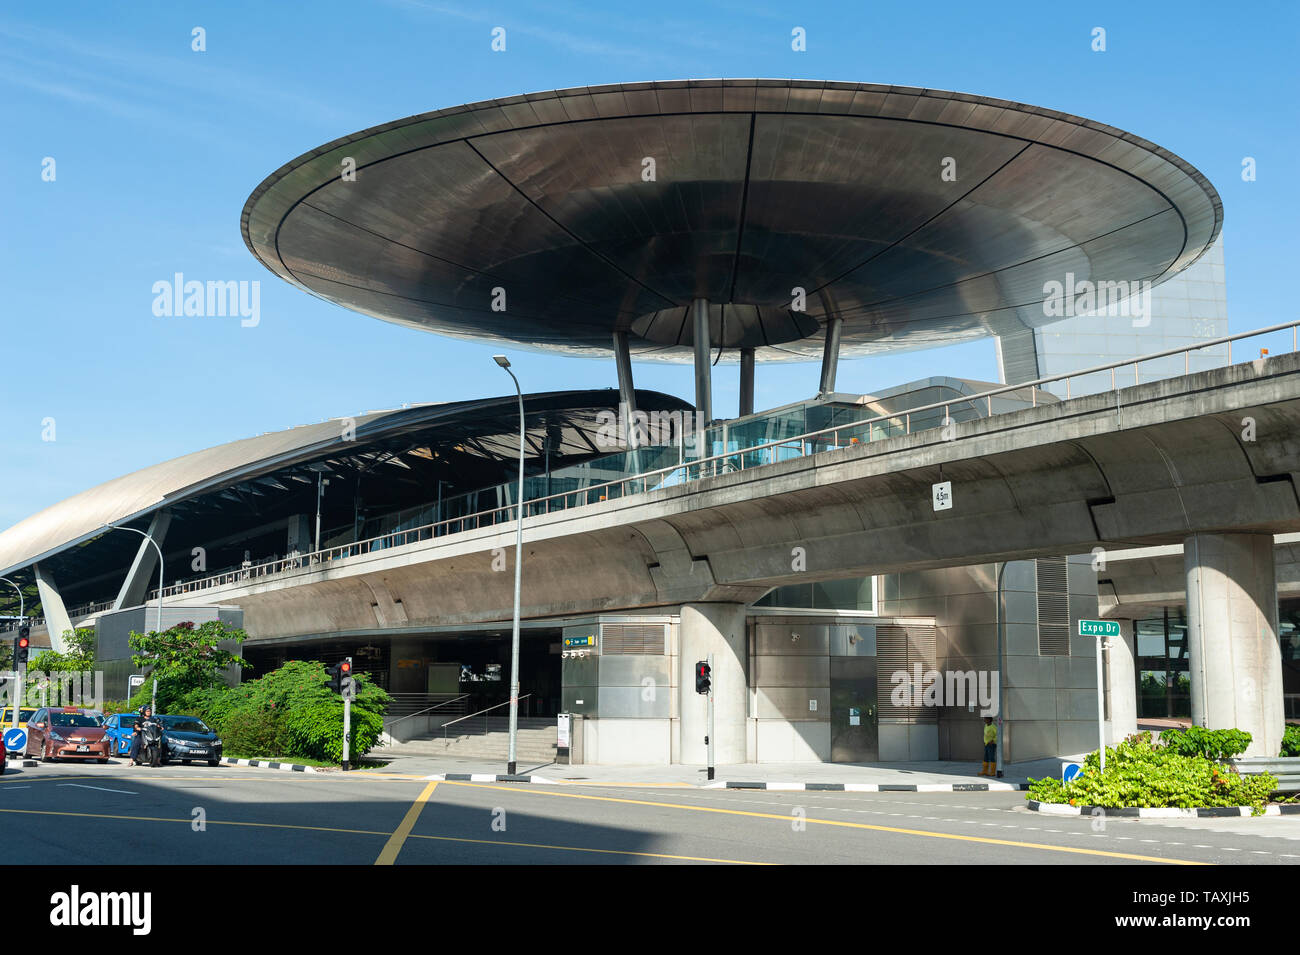 24.05.2019, Singapore, Republic of Singapore, Asia - Exterior view of the Expo station along the MRT network, designed by architect Norman Foster. Stock Photo